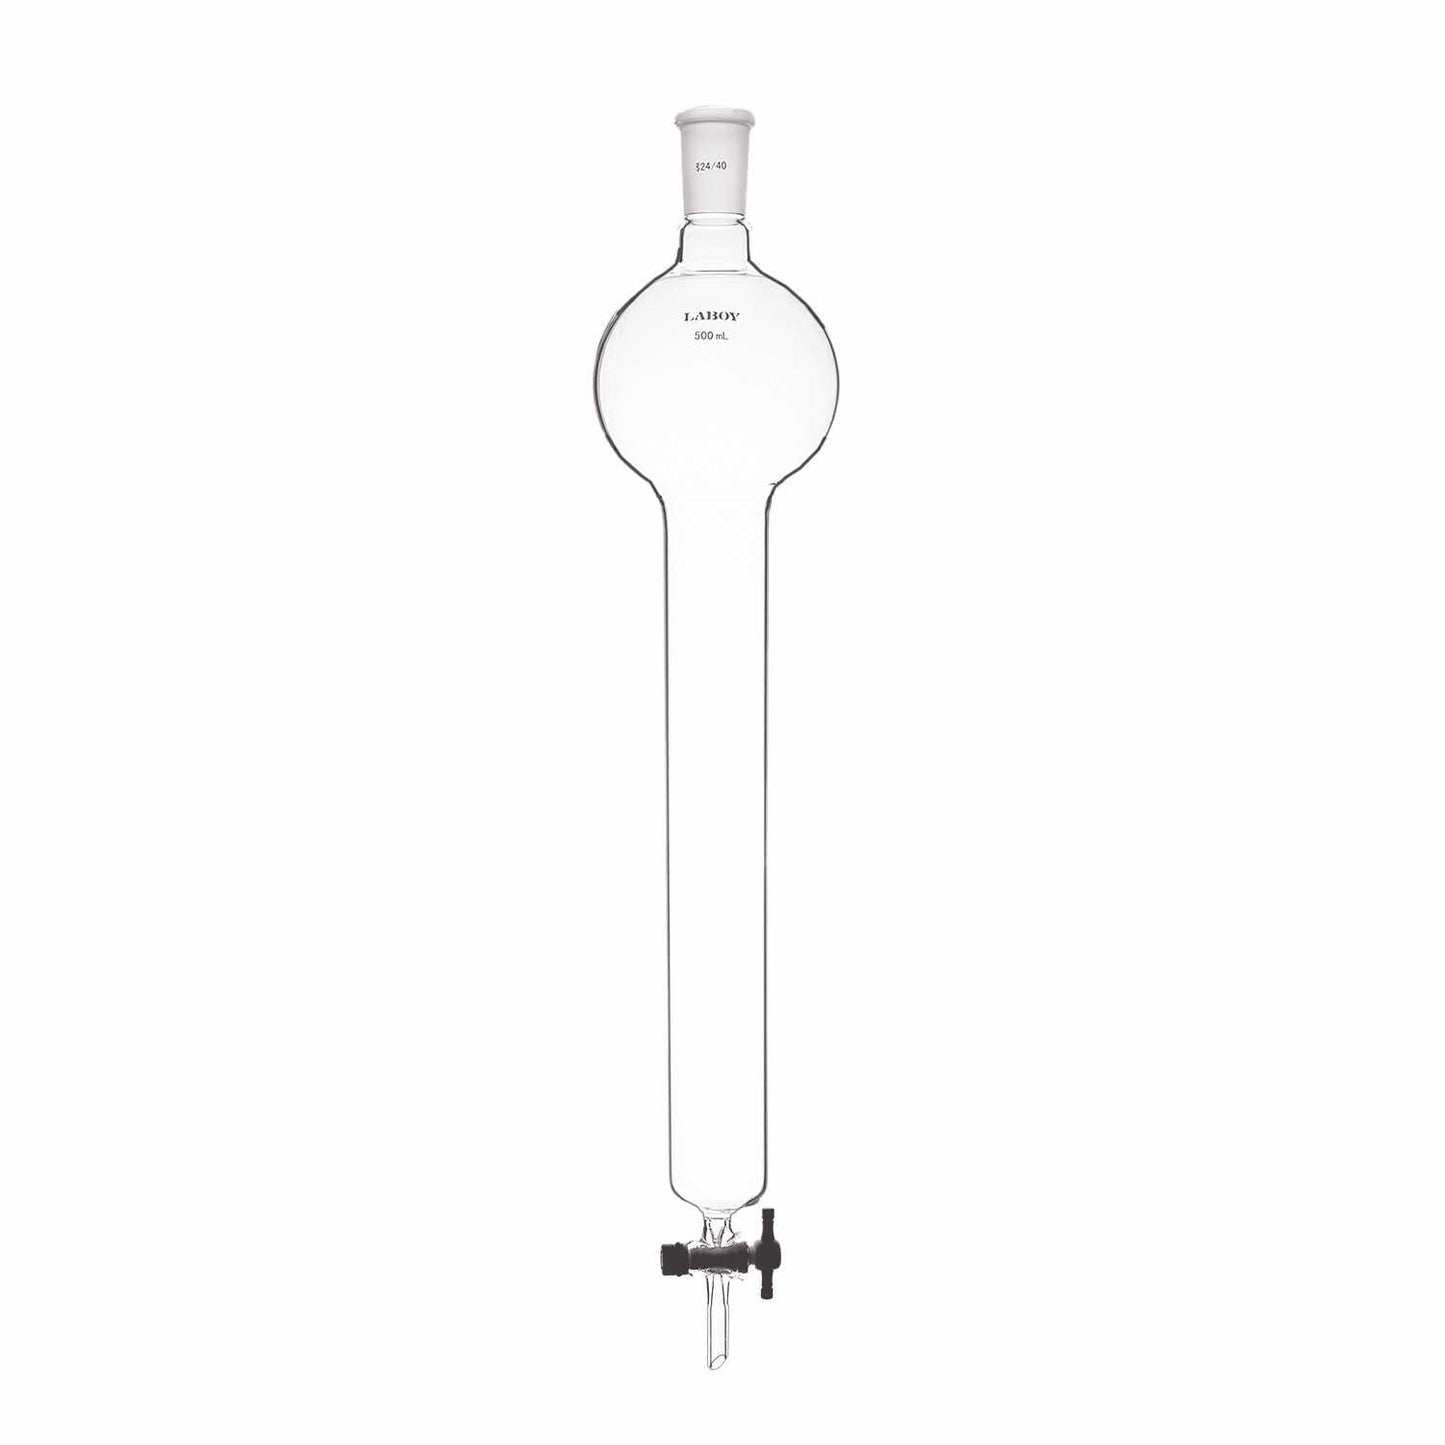 Glass Chromatography Column With Reservior and Taper Joint - Scienmart